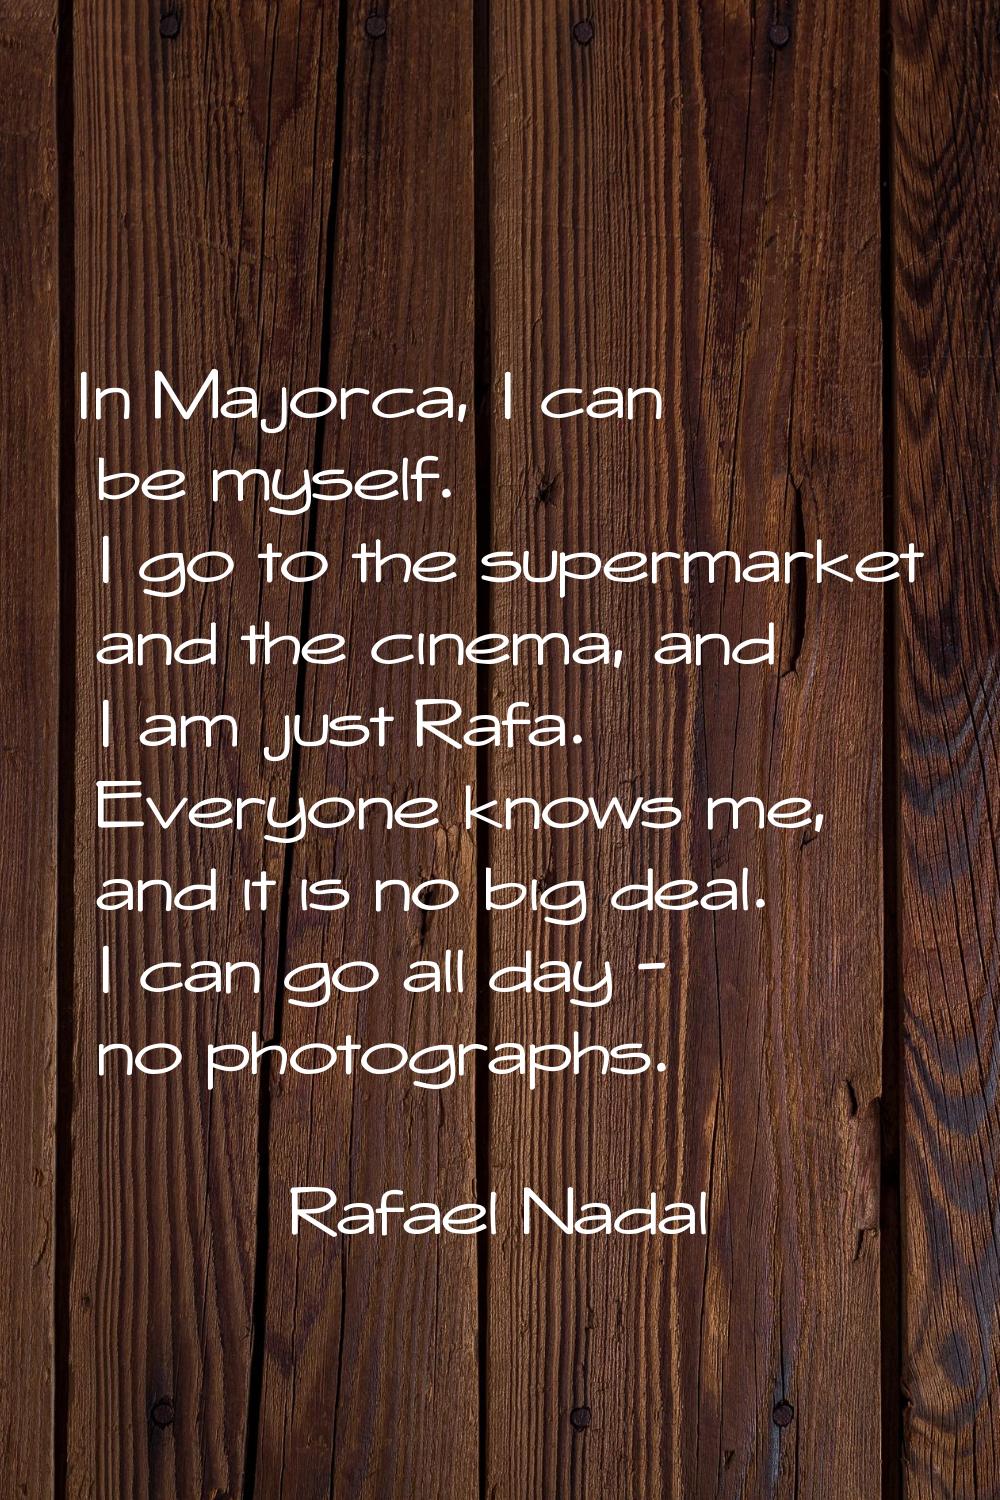 In Majorca, I can be myself. I go to the supermarket and the cinema, and I am just Rafa. Everyone k